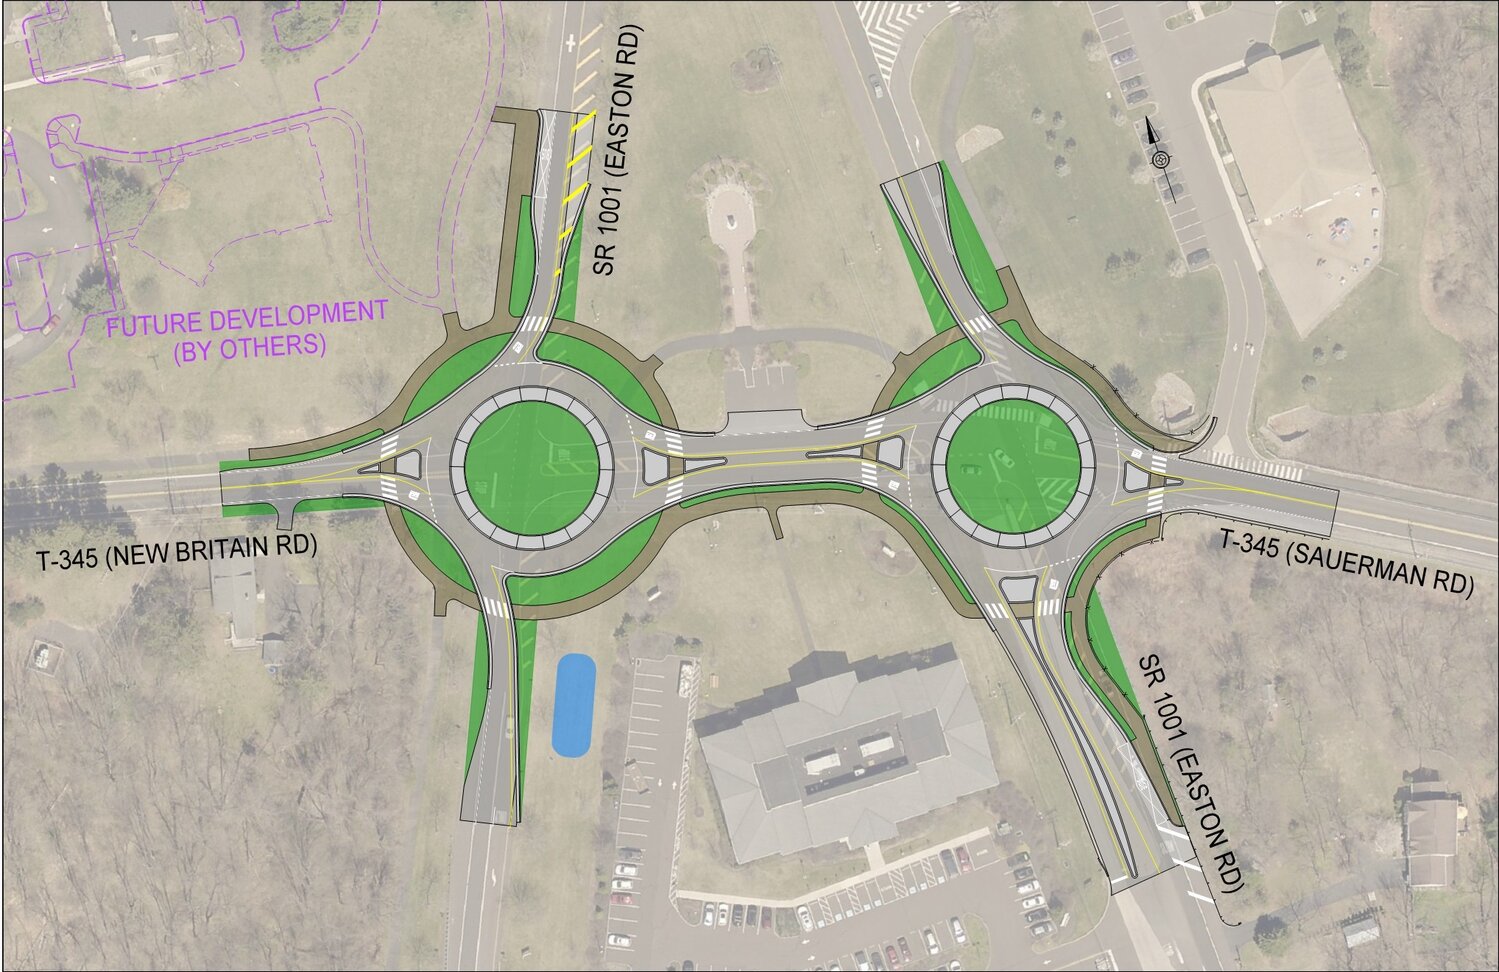 Two roundabouts will be constructed this fall at the intersection of Easton Road and New Britain Road/Sauerman Road.